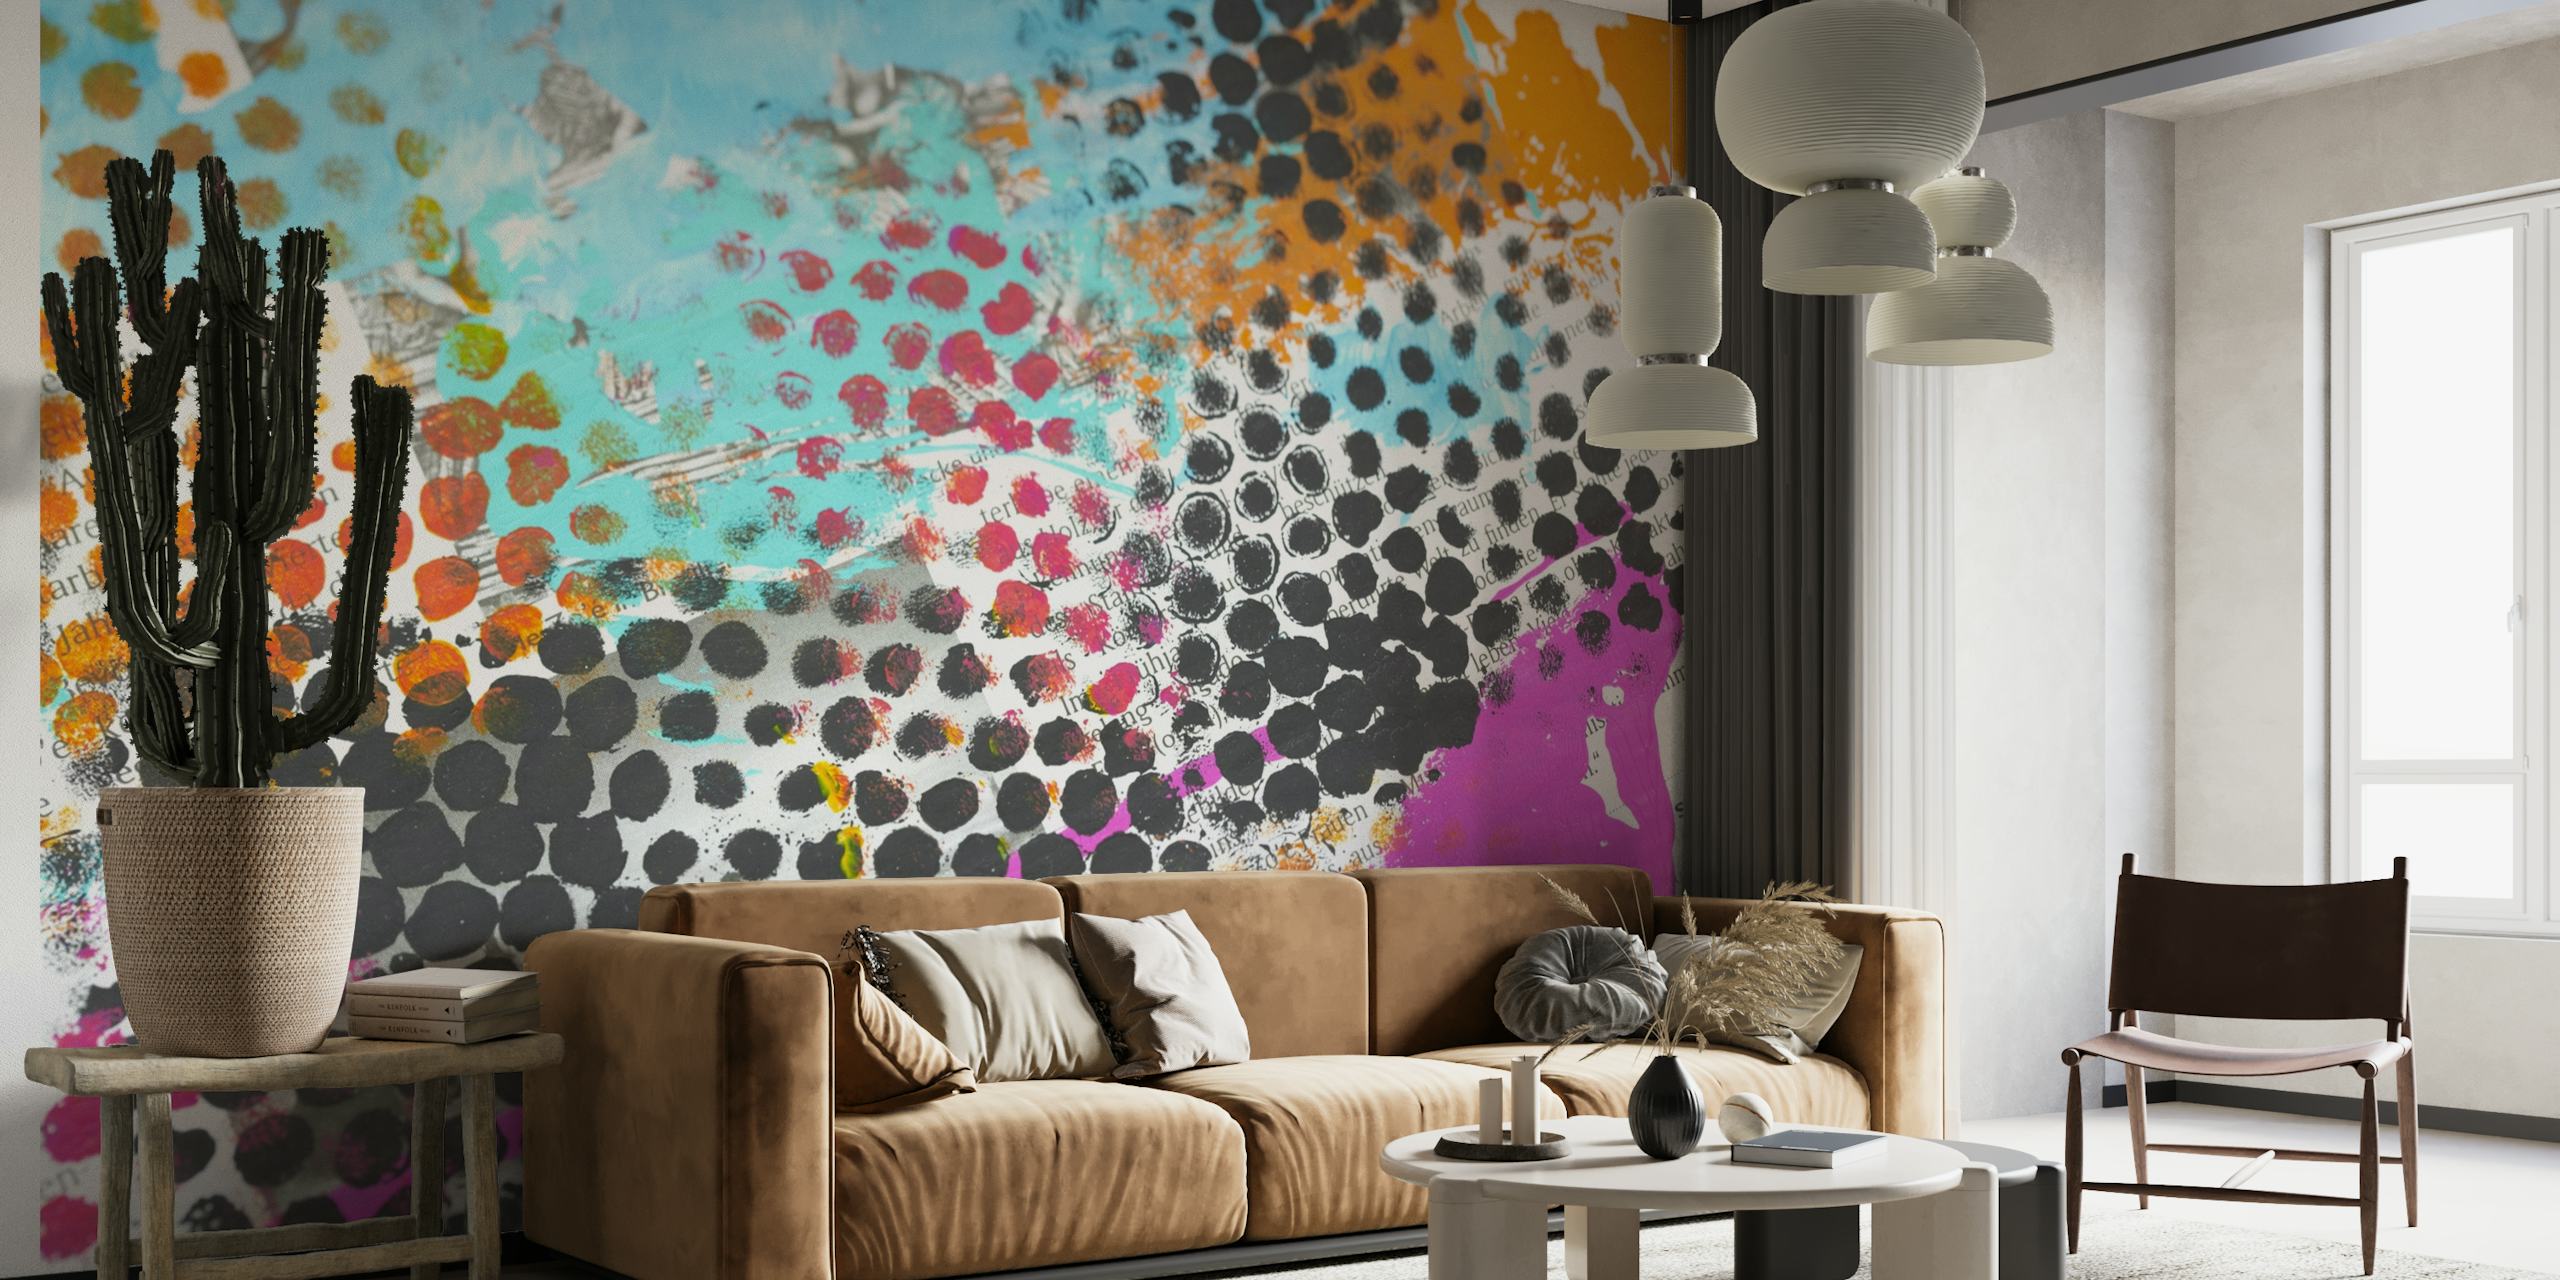 Colorful grunge-style wall mural with dotted patterns and vivid colors